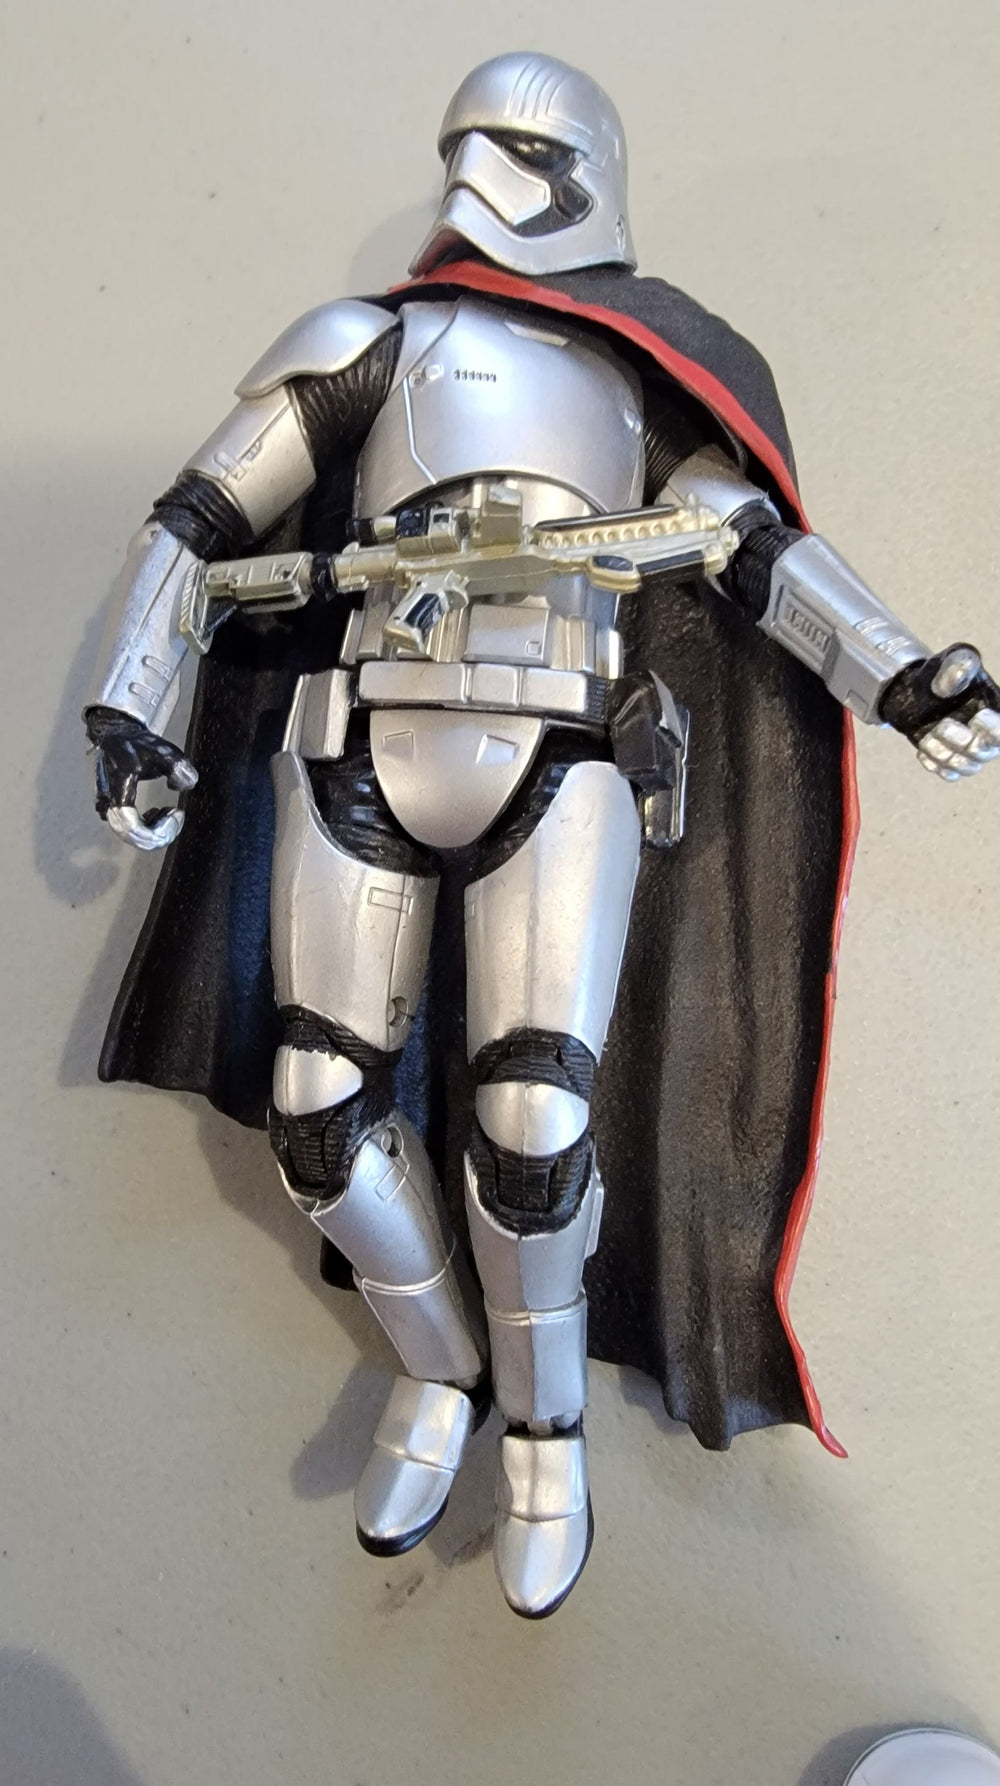 STAR WARS BLACK SERIES 6 INCH CAPTAIN PHASMA WITH CLOTH CAPE FIGURE (LOOSE - As Shown)